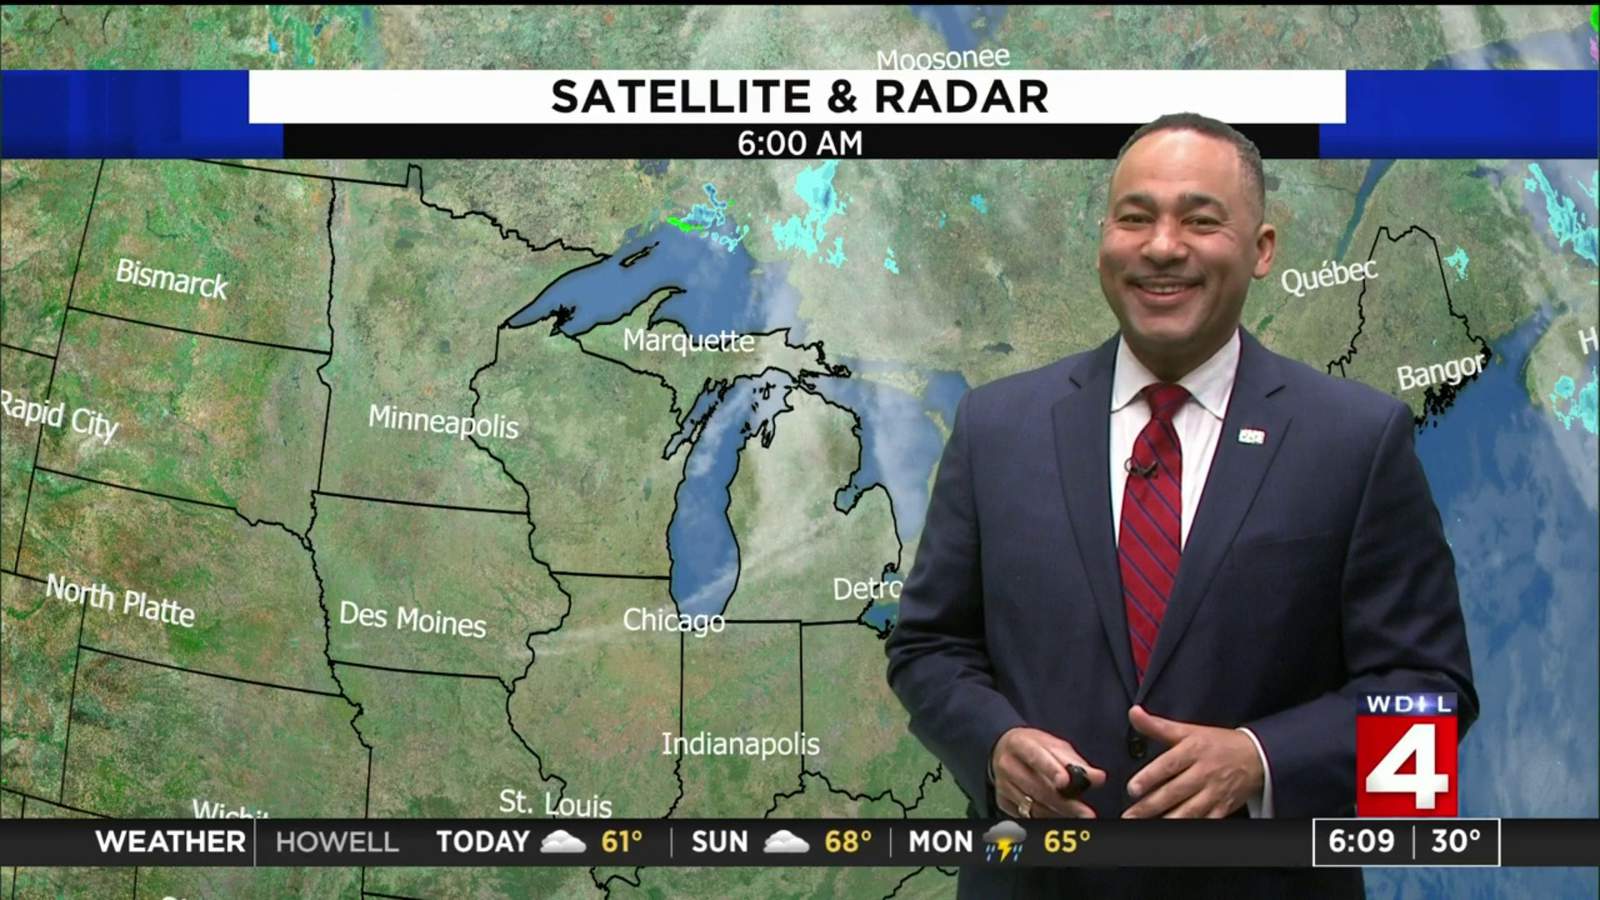 Metro Detroit weather: Chilly Saturday morning, milder in the afternoon